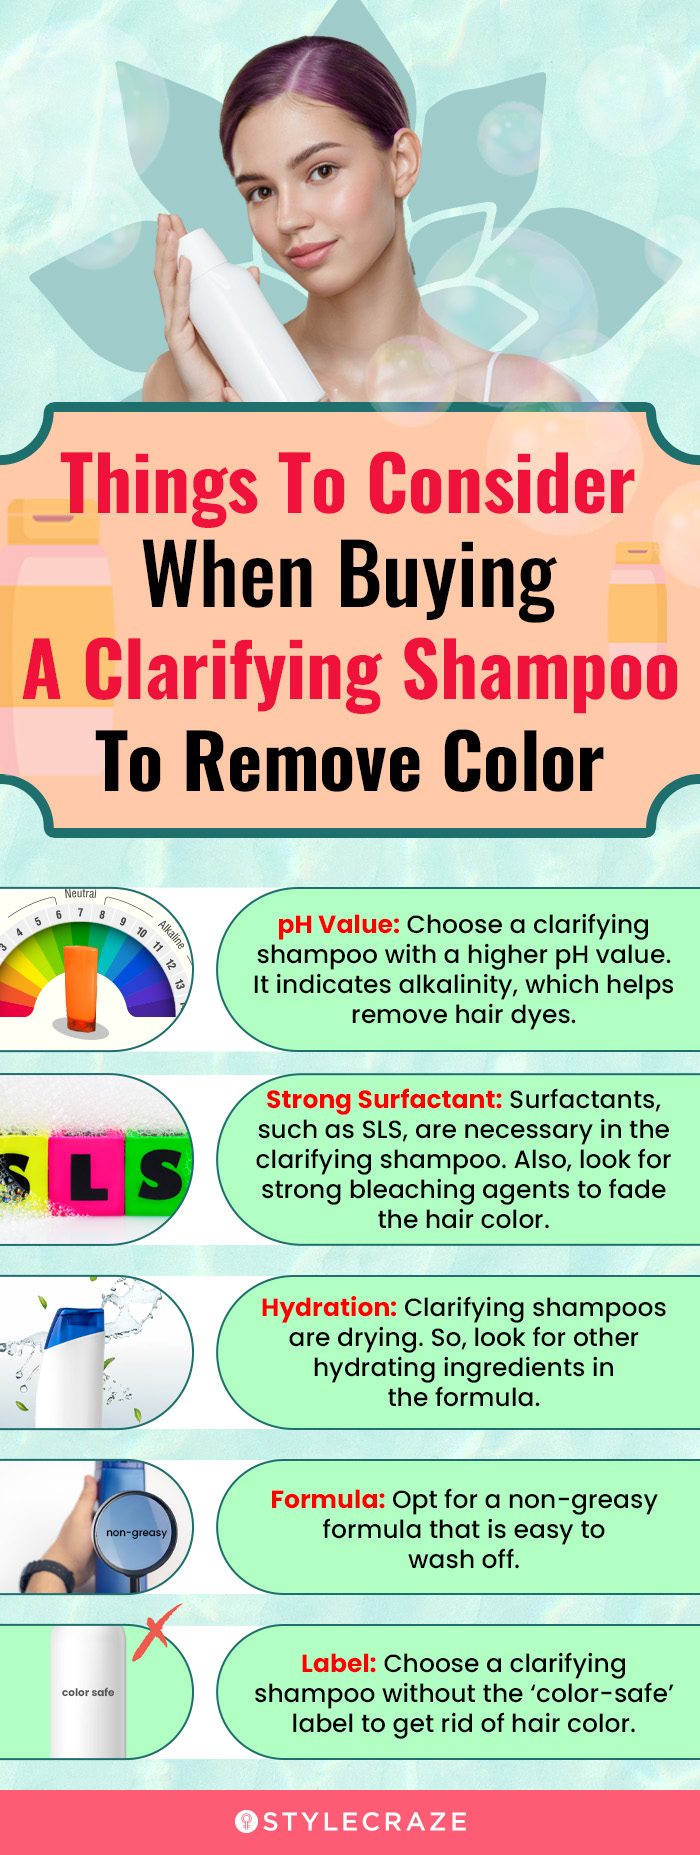 Things To Consider When Buying A Clarifying Shampoo To Remove Color